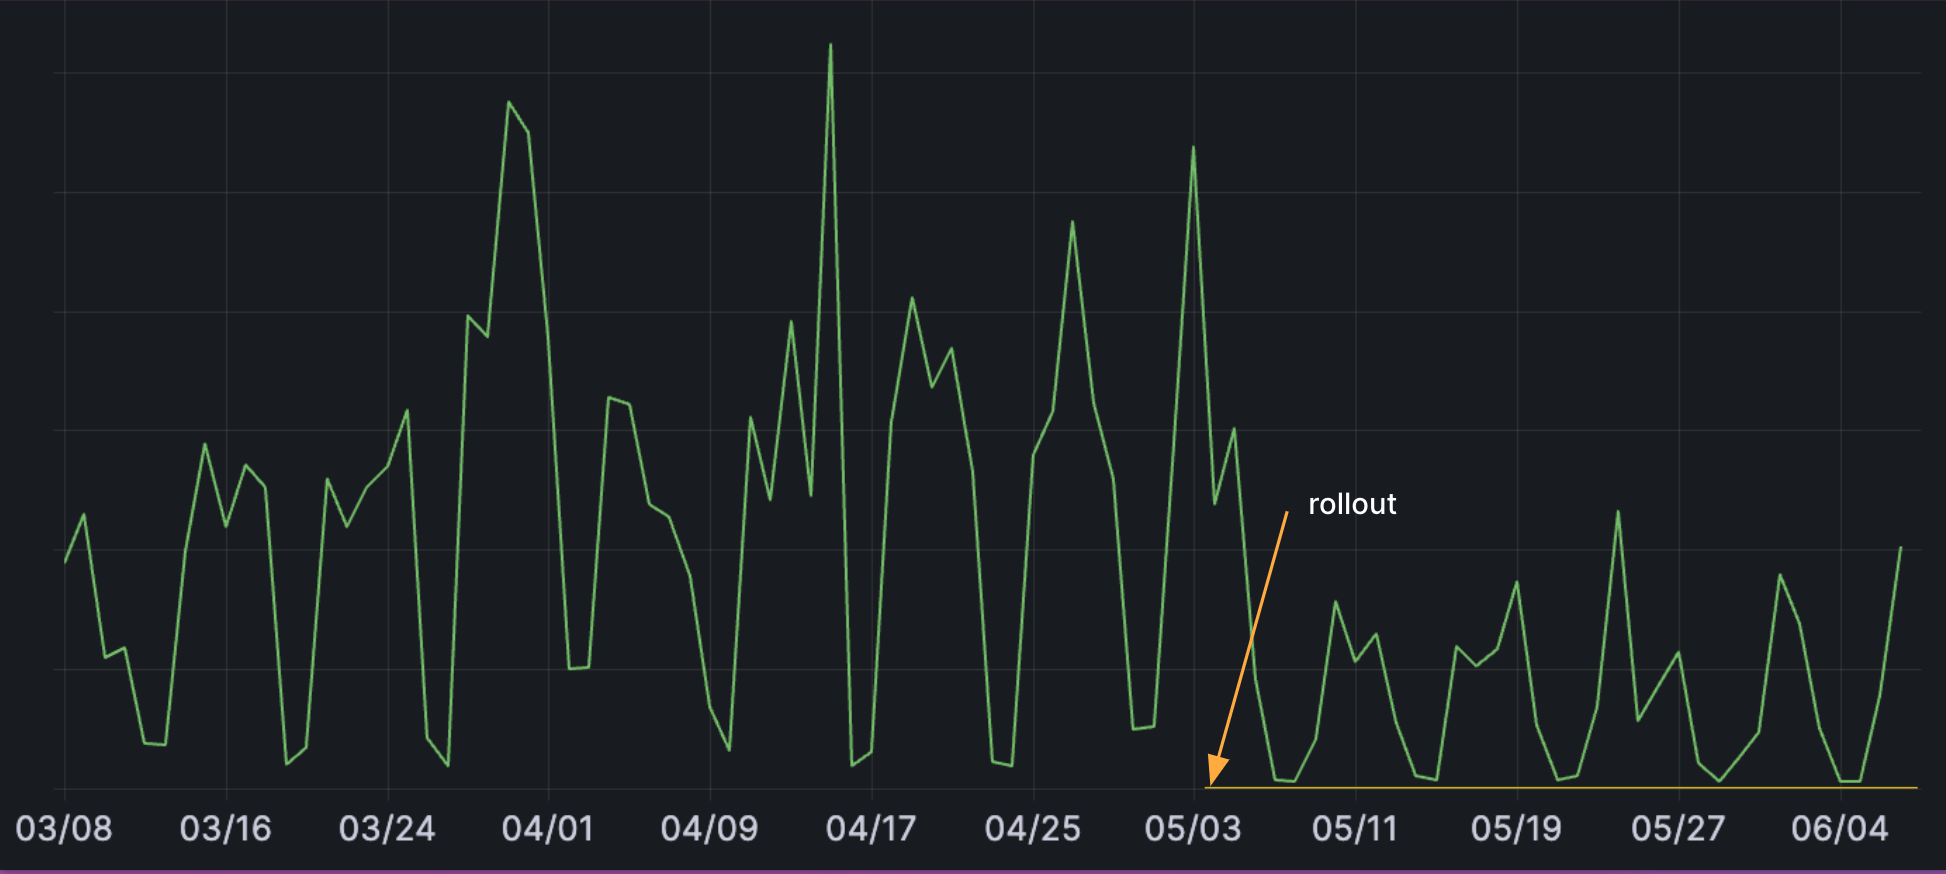 A graph showing reduced requests to object storage